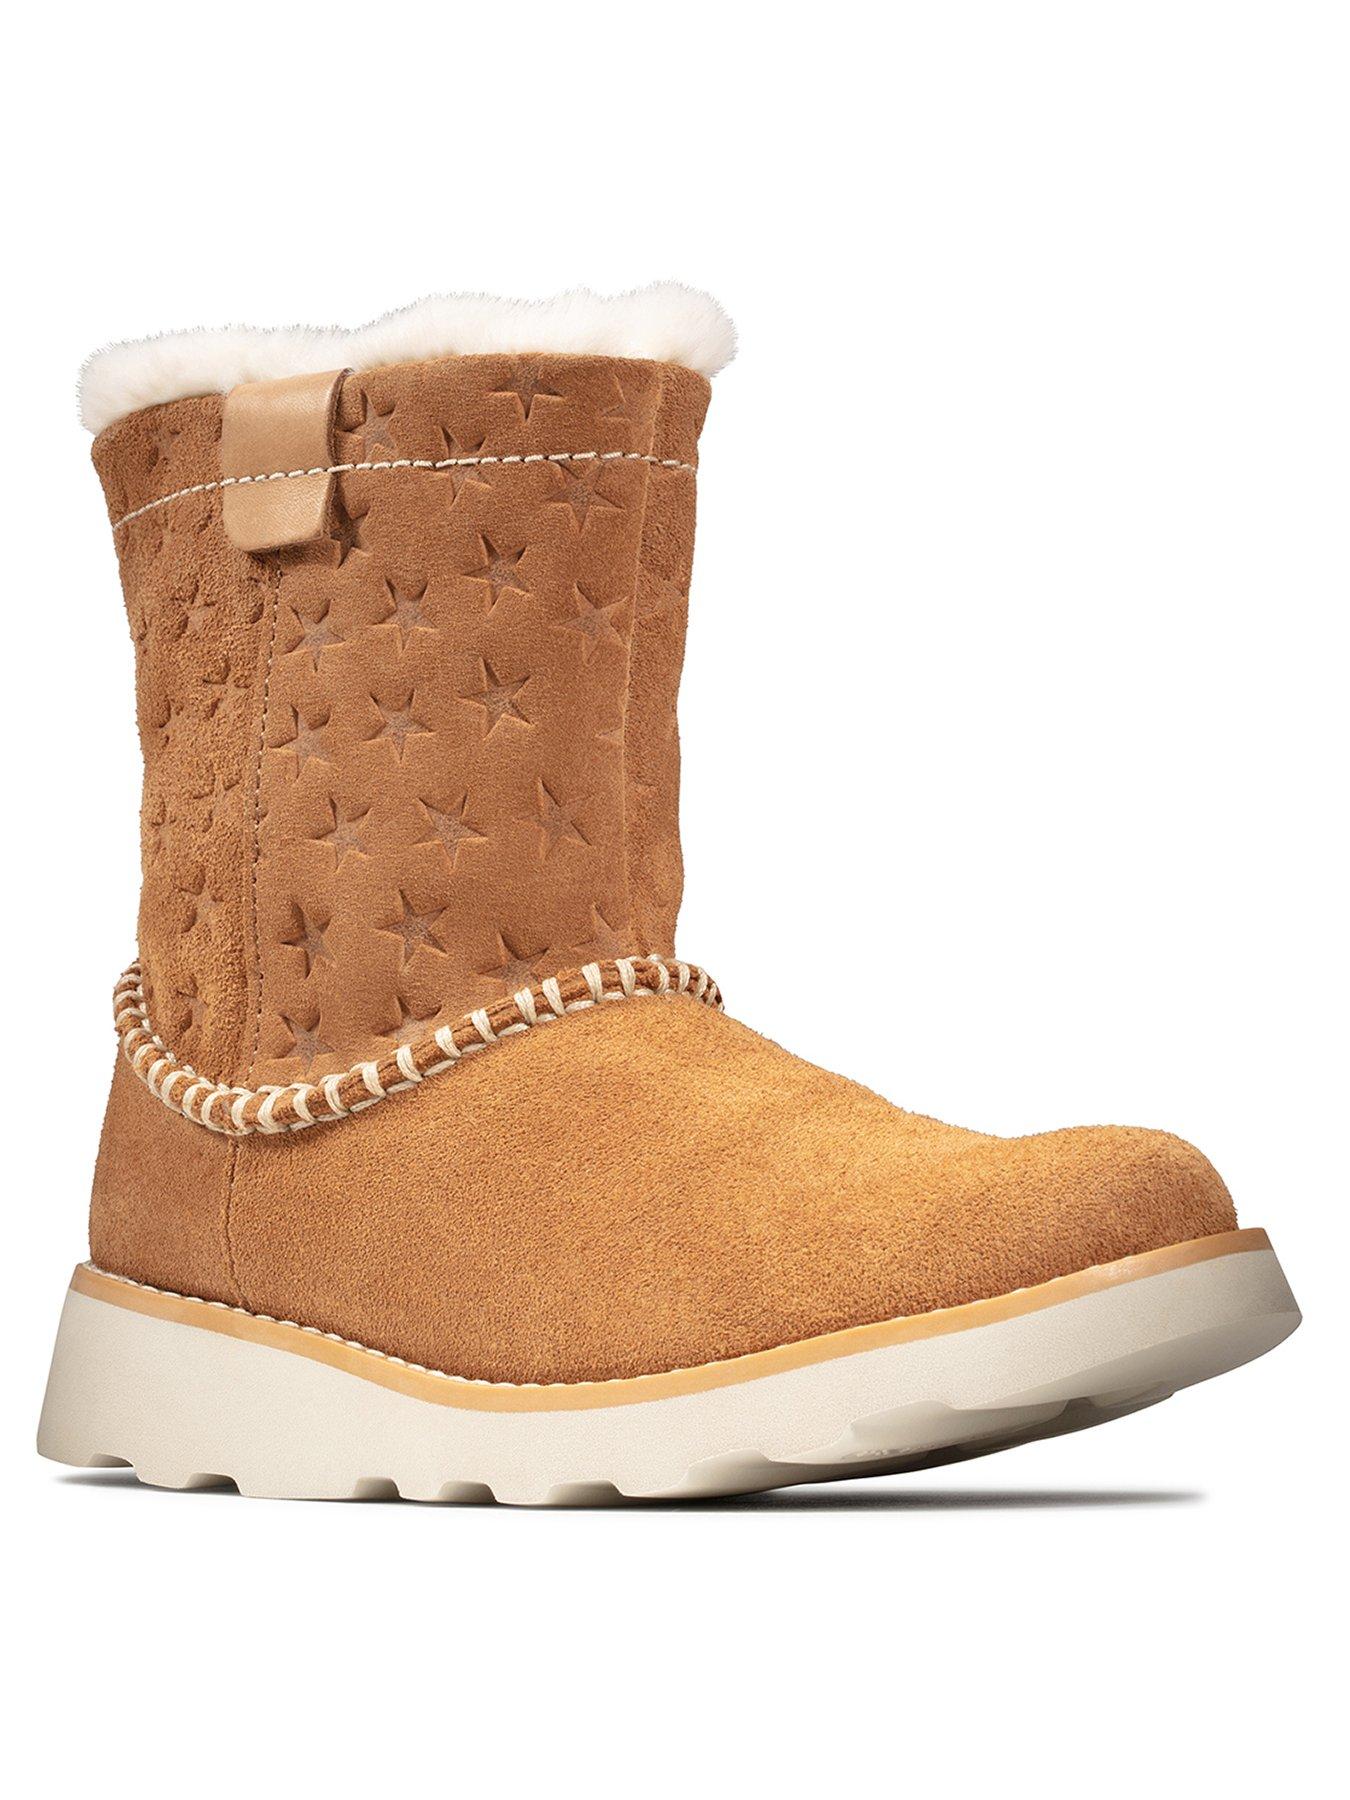 Clarks Girls Crown Piper Tan Boots 